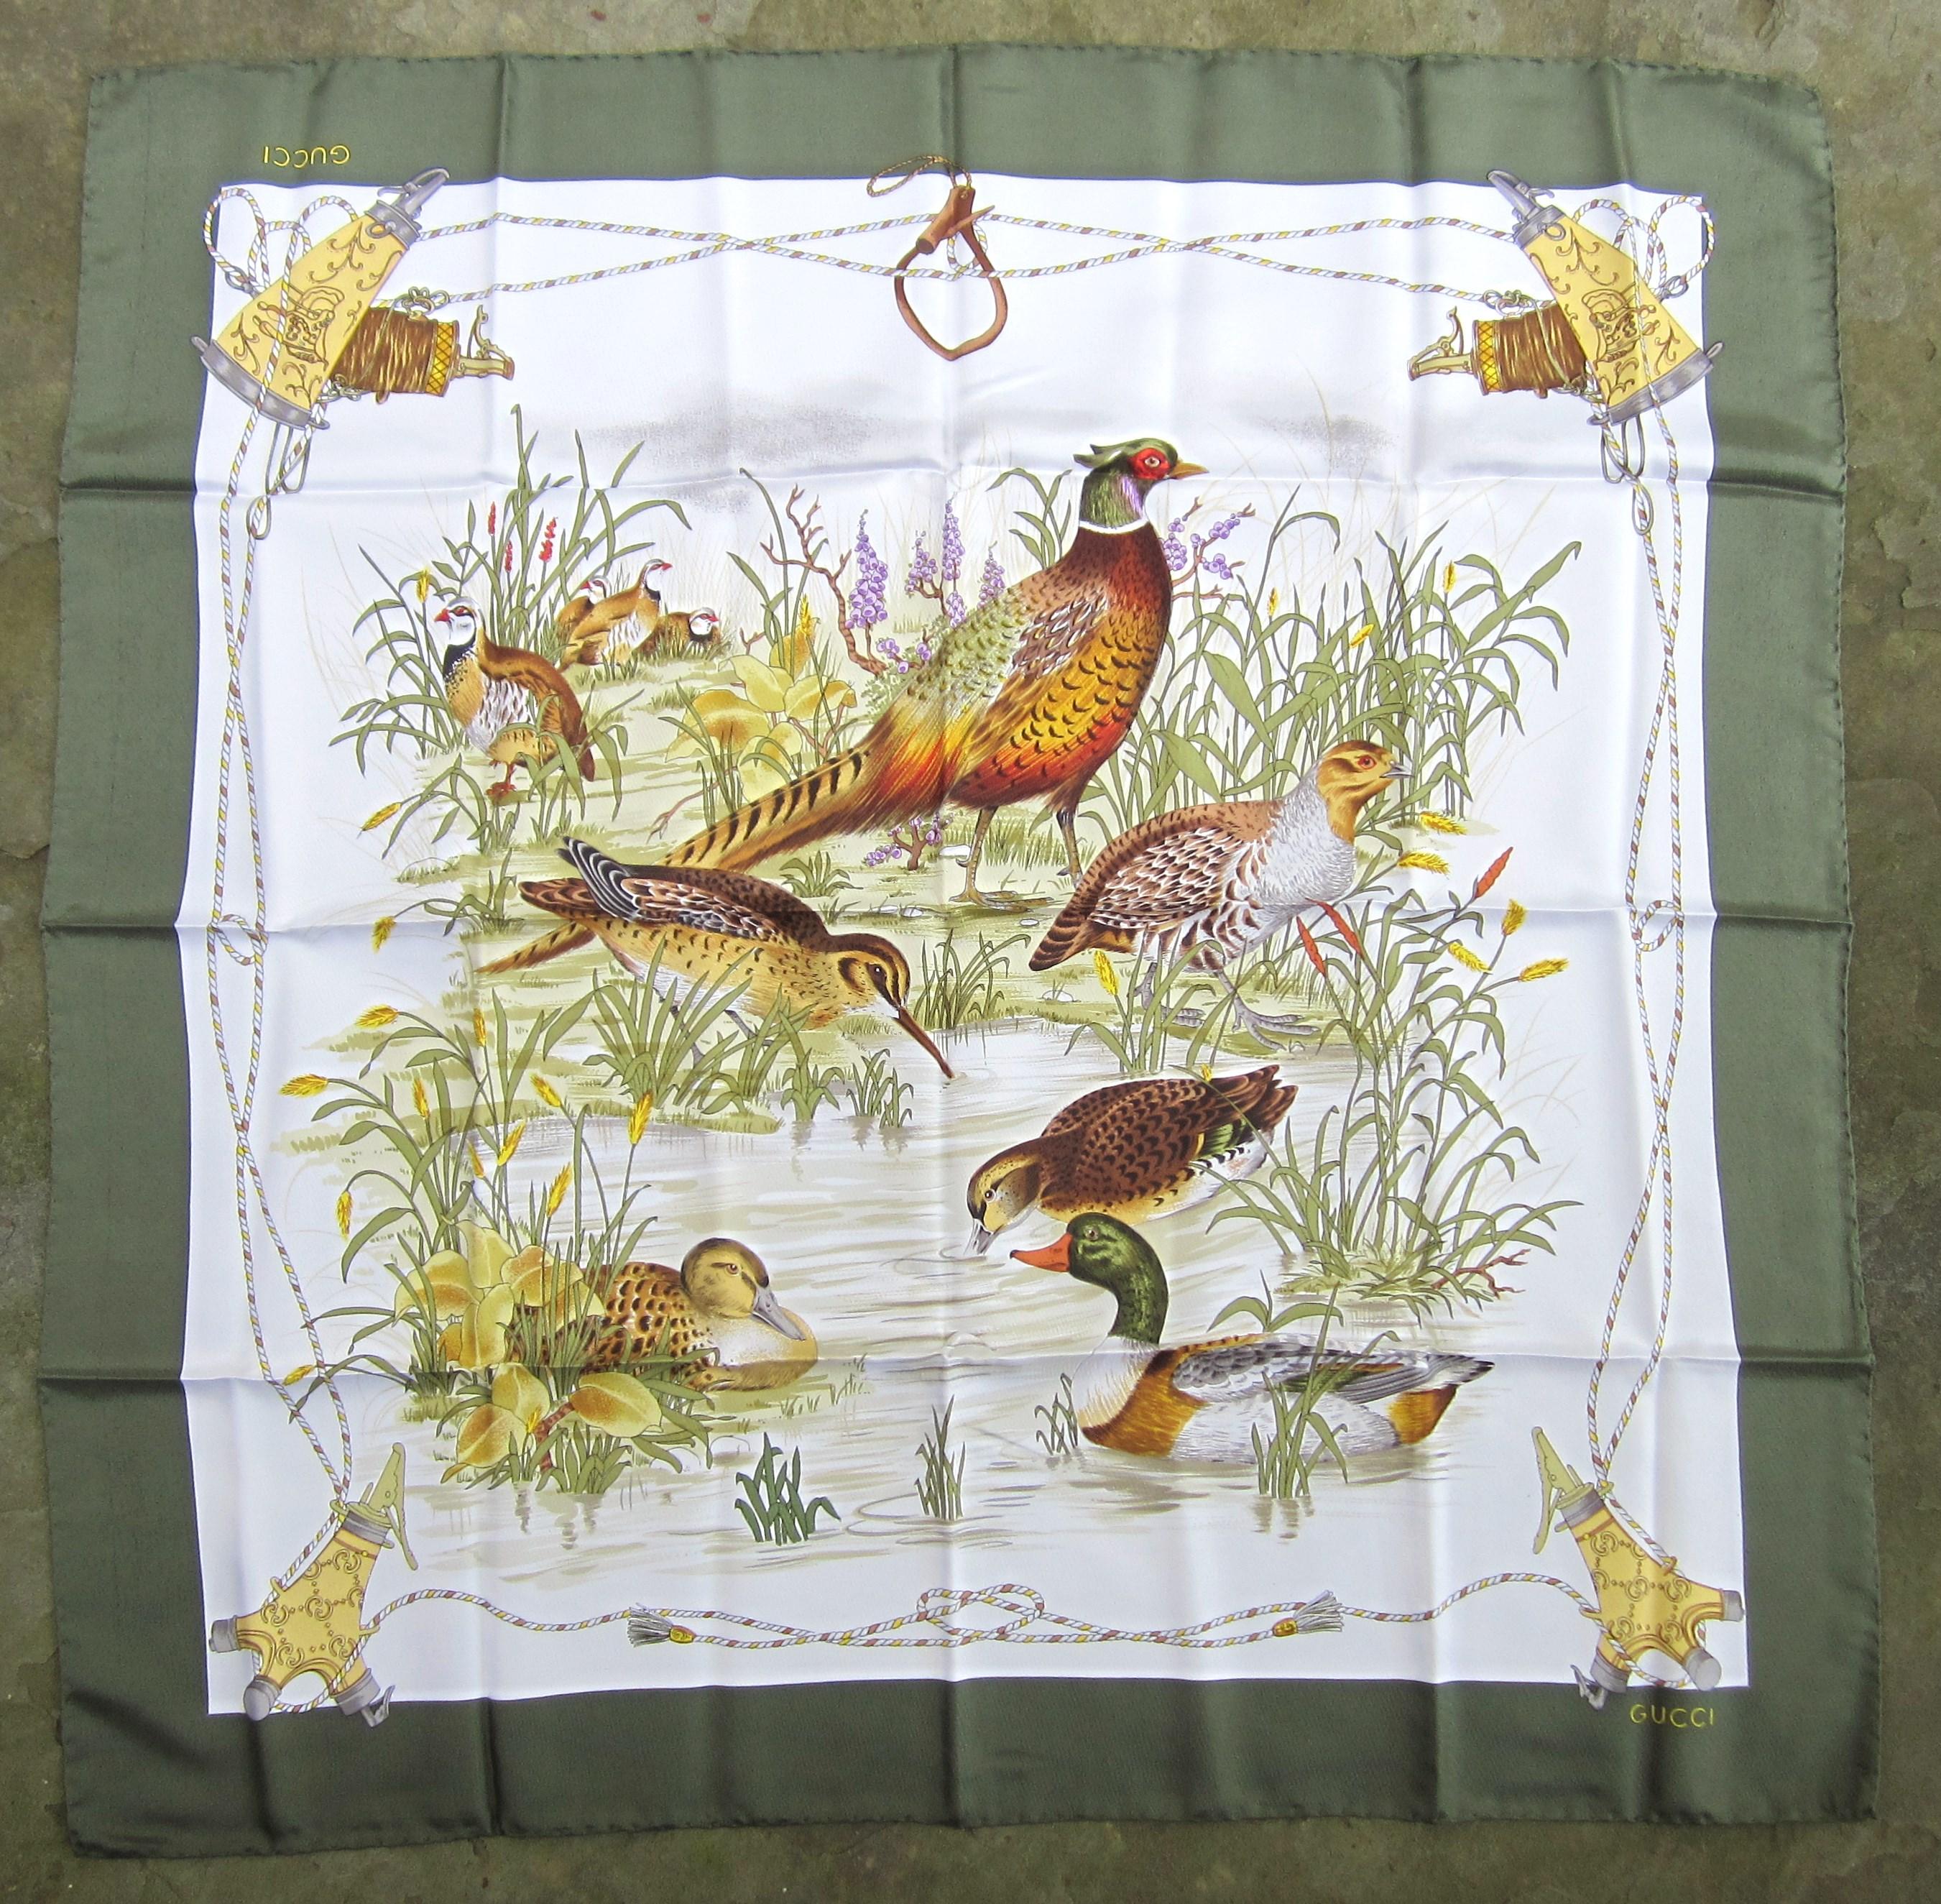  Gucci Silk Scarf Wildlife Duck 1990s New, Never Worn In New Condition In Wallkill, NY